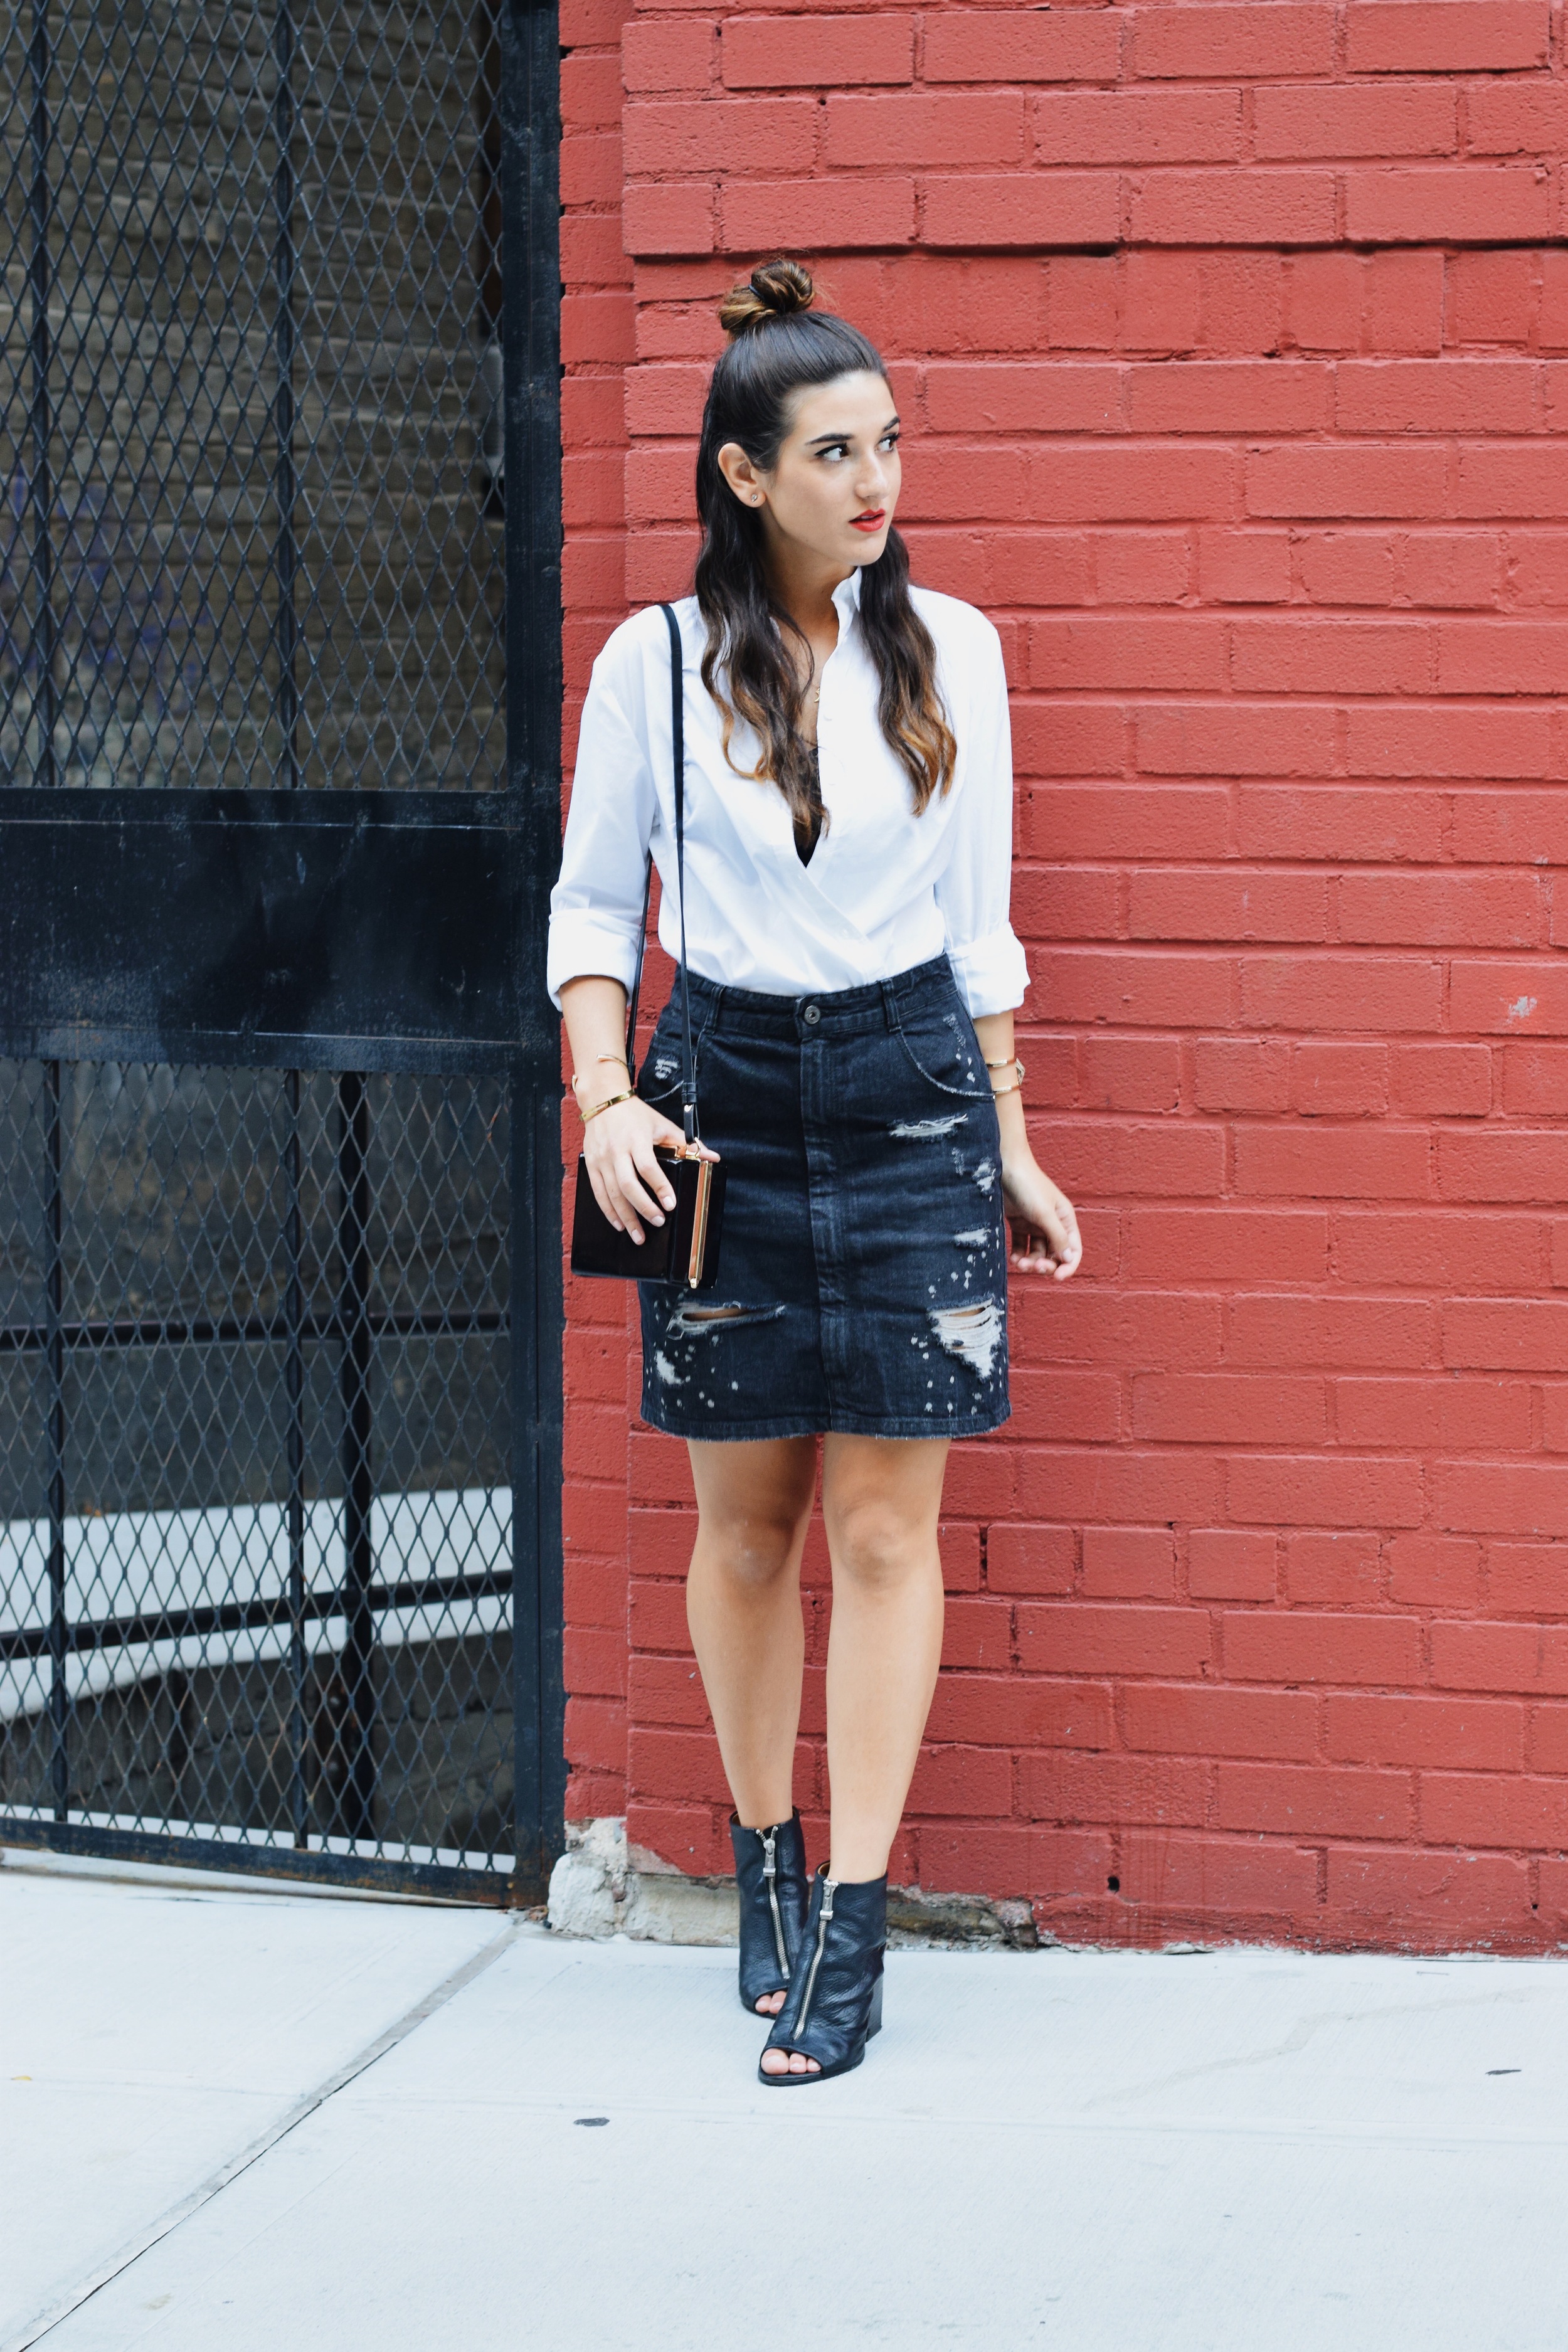 Coco & Marie Moon Necklace Giveaway Louboutins & Love Fashion Blog Esther Santer NYC Street Style Blogger Lifestyle Topknot Bun Denim Ripped Jean Skirt White Button Down Zara Black Box Clutch Bag Nordstrom Booties Bralette Girl Women Hair Gold Jewelry.JPG